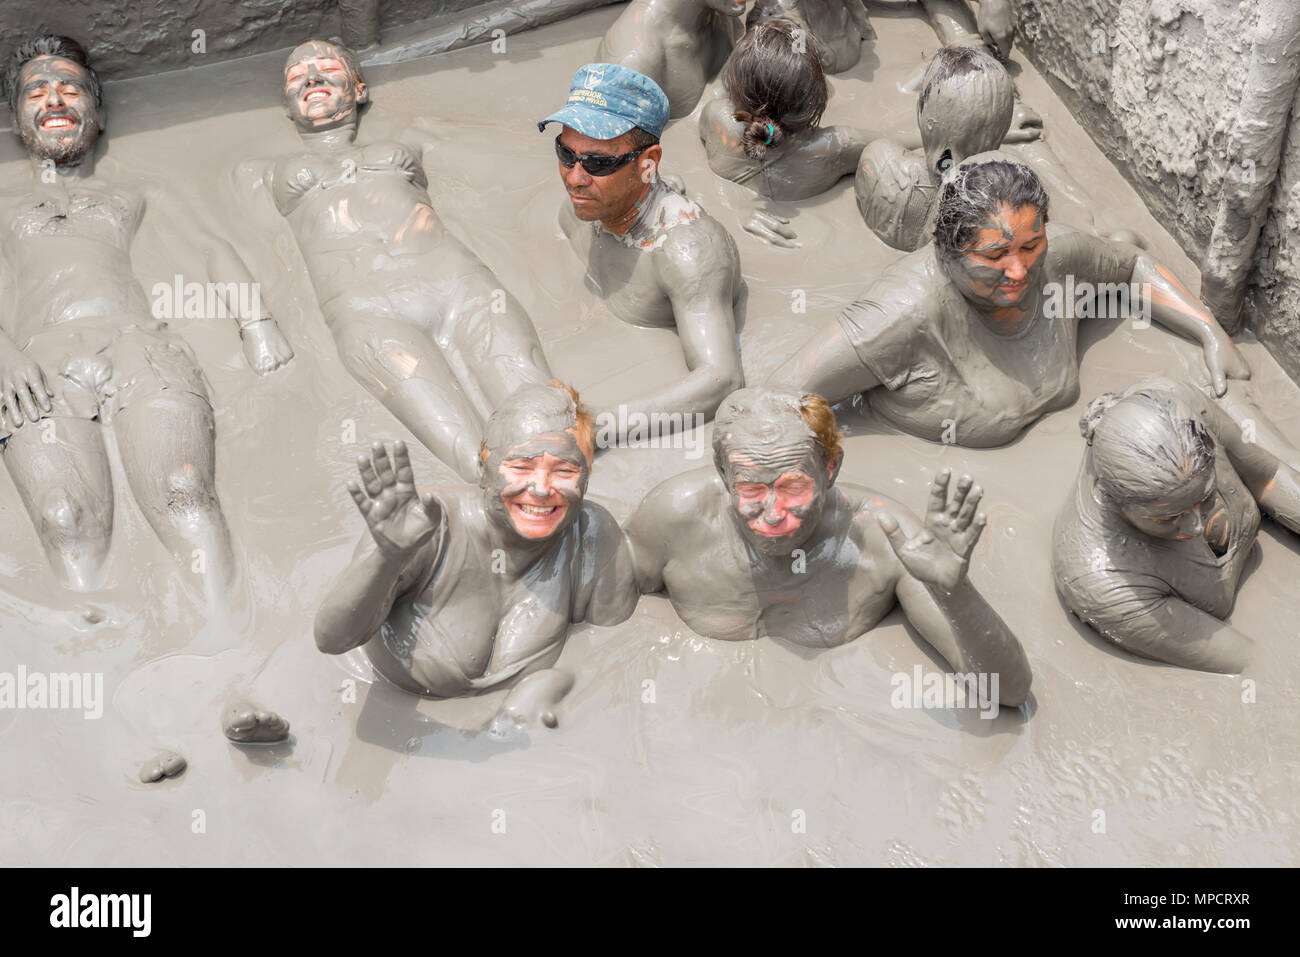 Cartagena, Colombia - March 23, 2017: People Taking Mud Bath In Crater Of Totumo Volcano Near Cartagena, Colombia Stock Photo